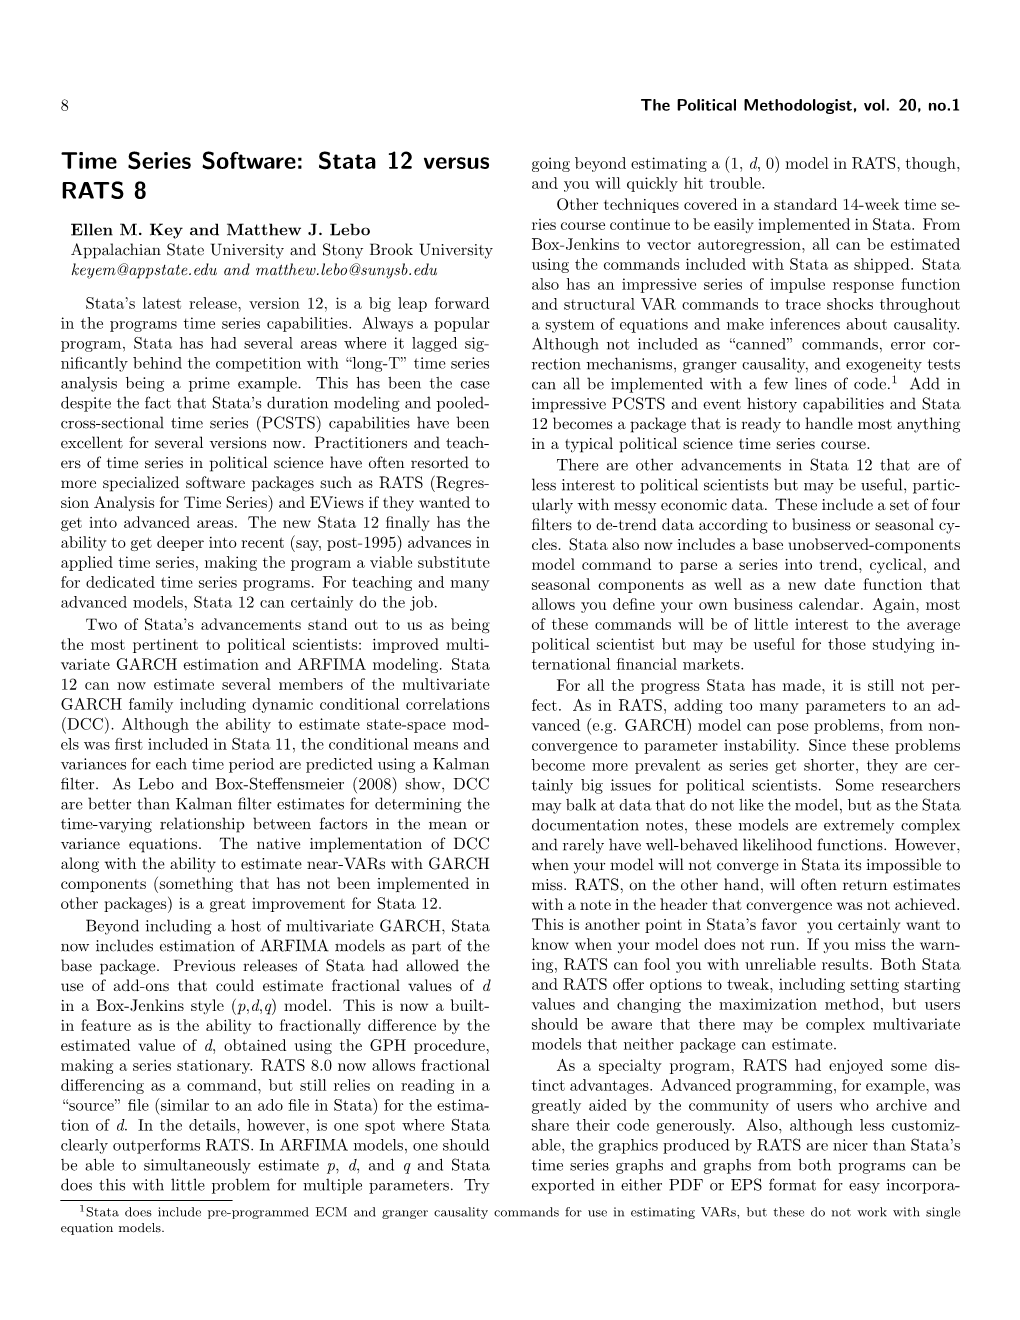 Time Series Software: Stata 12 Versus RATS 8